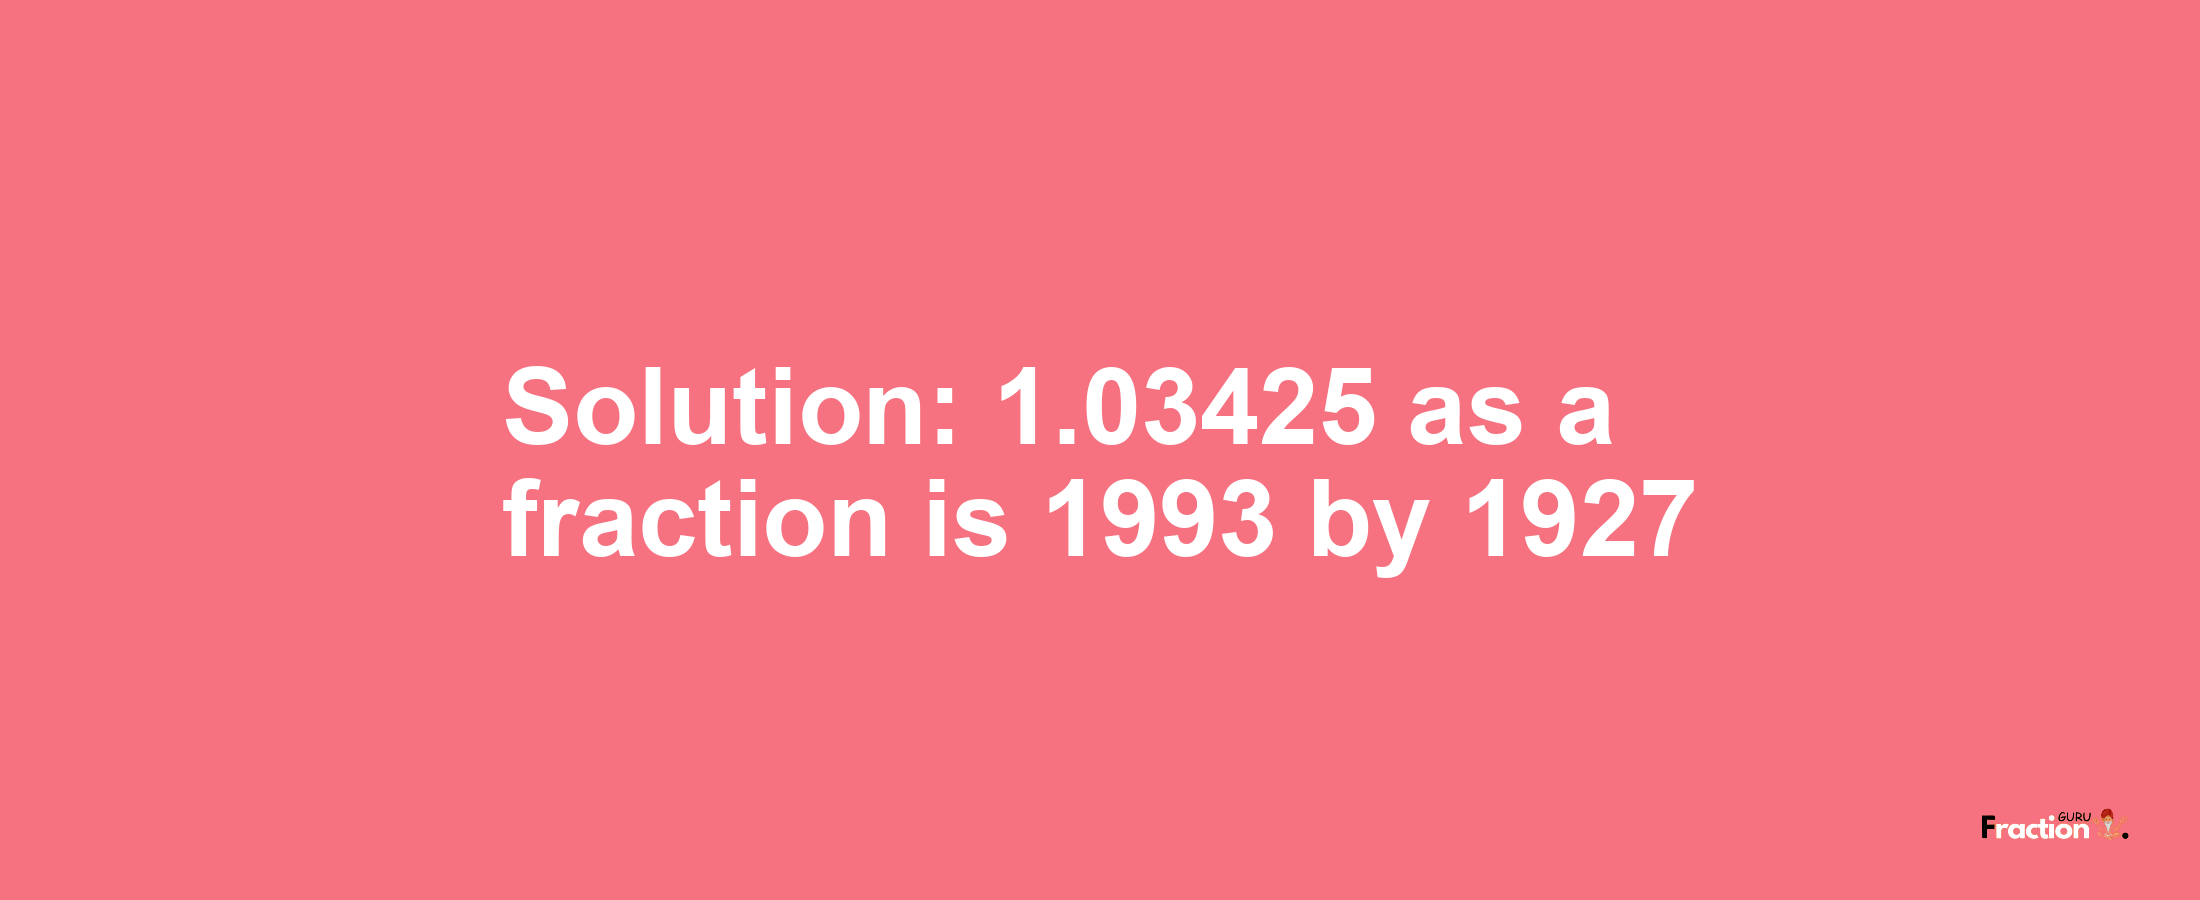 Solution:1.03425 as a fraction is 1993/1927